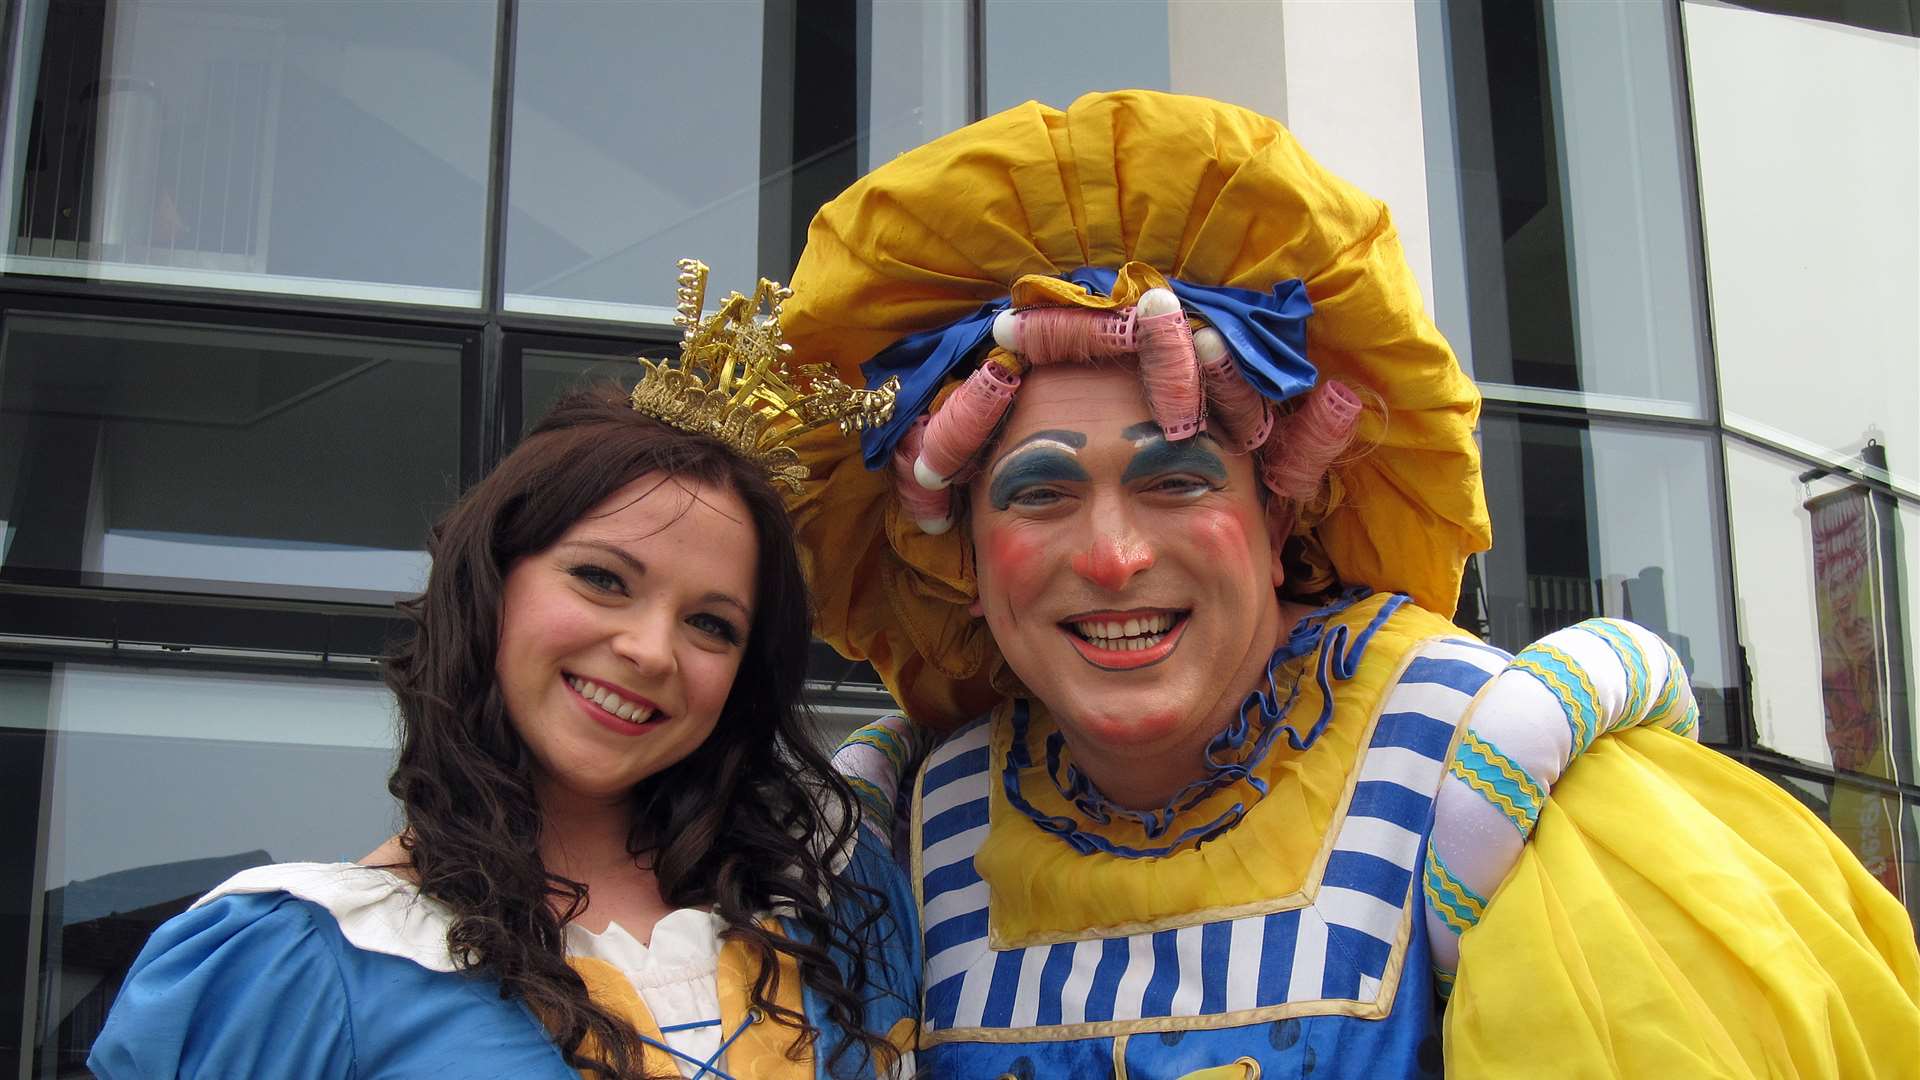 Ben Roddy as Dame Trott and Gemma Sutton as the Princess in Jack and the Beanstalk